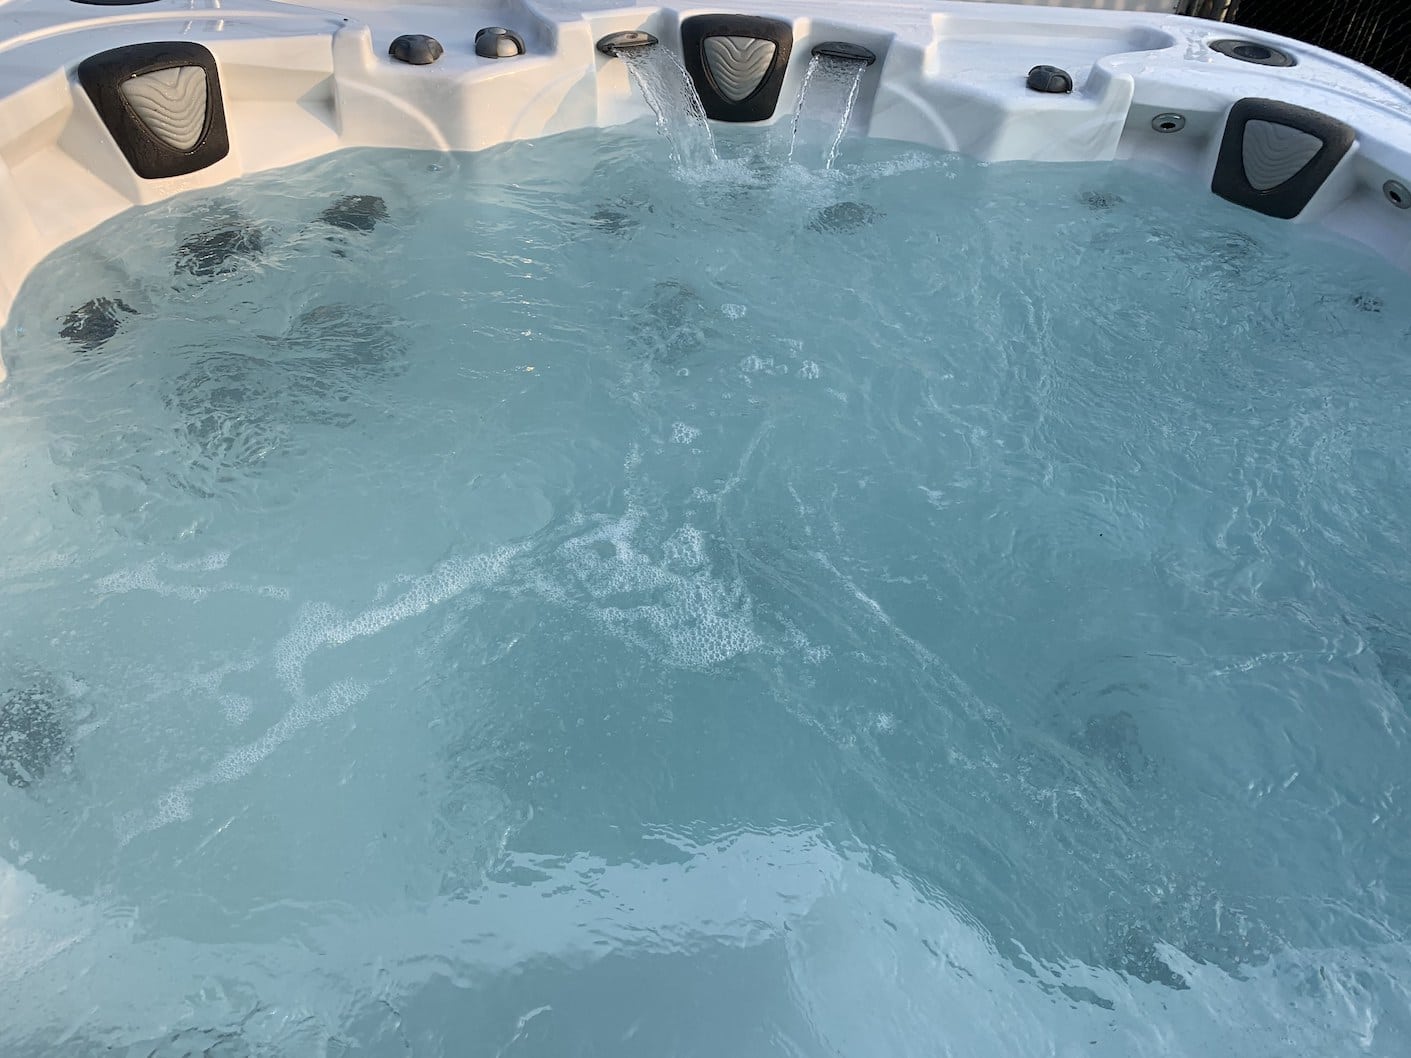 SOLD! Coast Spa Hot Tub For Sale in Saskatoon! Yours for $4,500